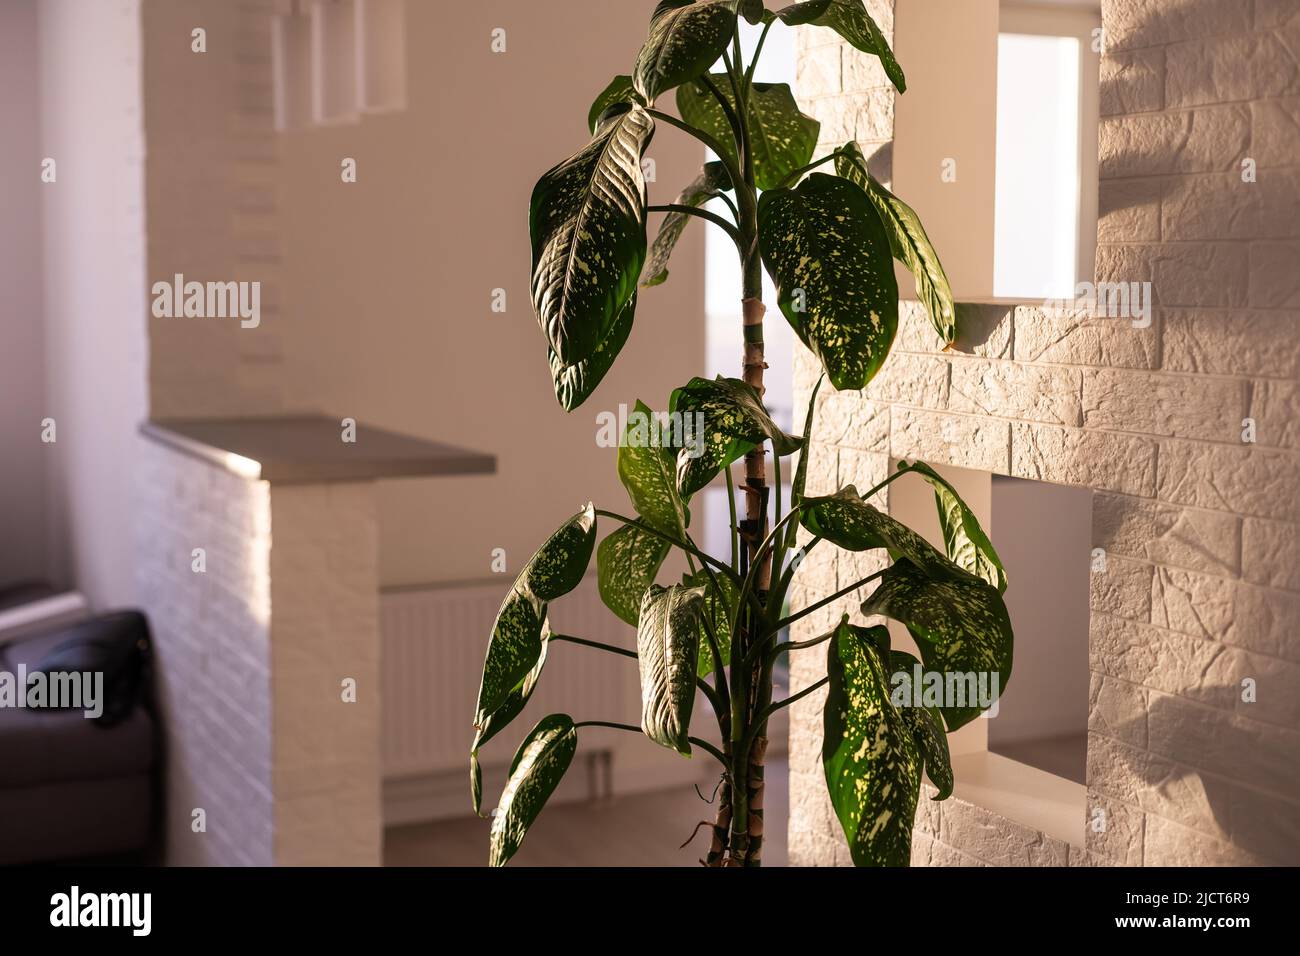 Dieffenbachia amoena is a monocot which is commonly cultivated as a houseplant, for its decorative leaves. It is a very popular and hardy shade-loving Stock Photo